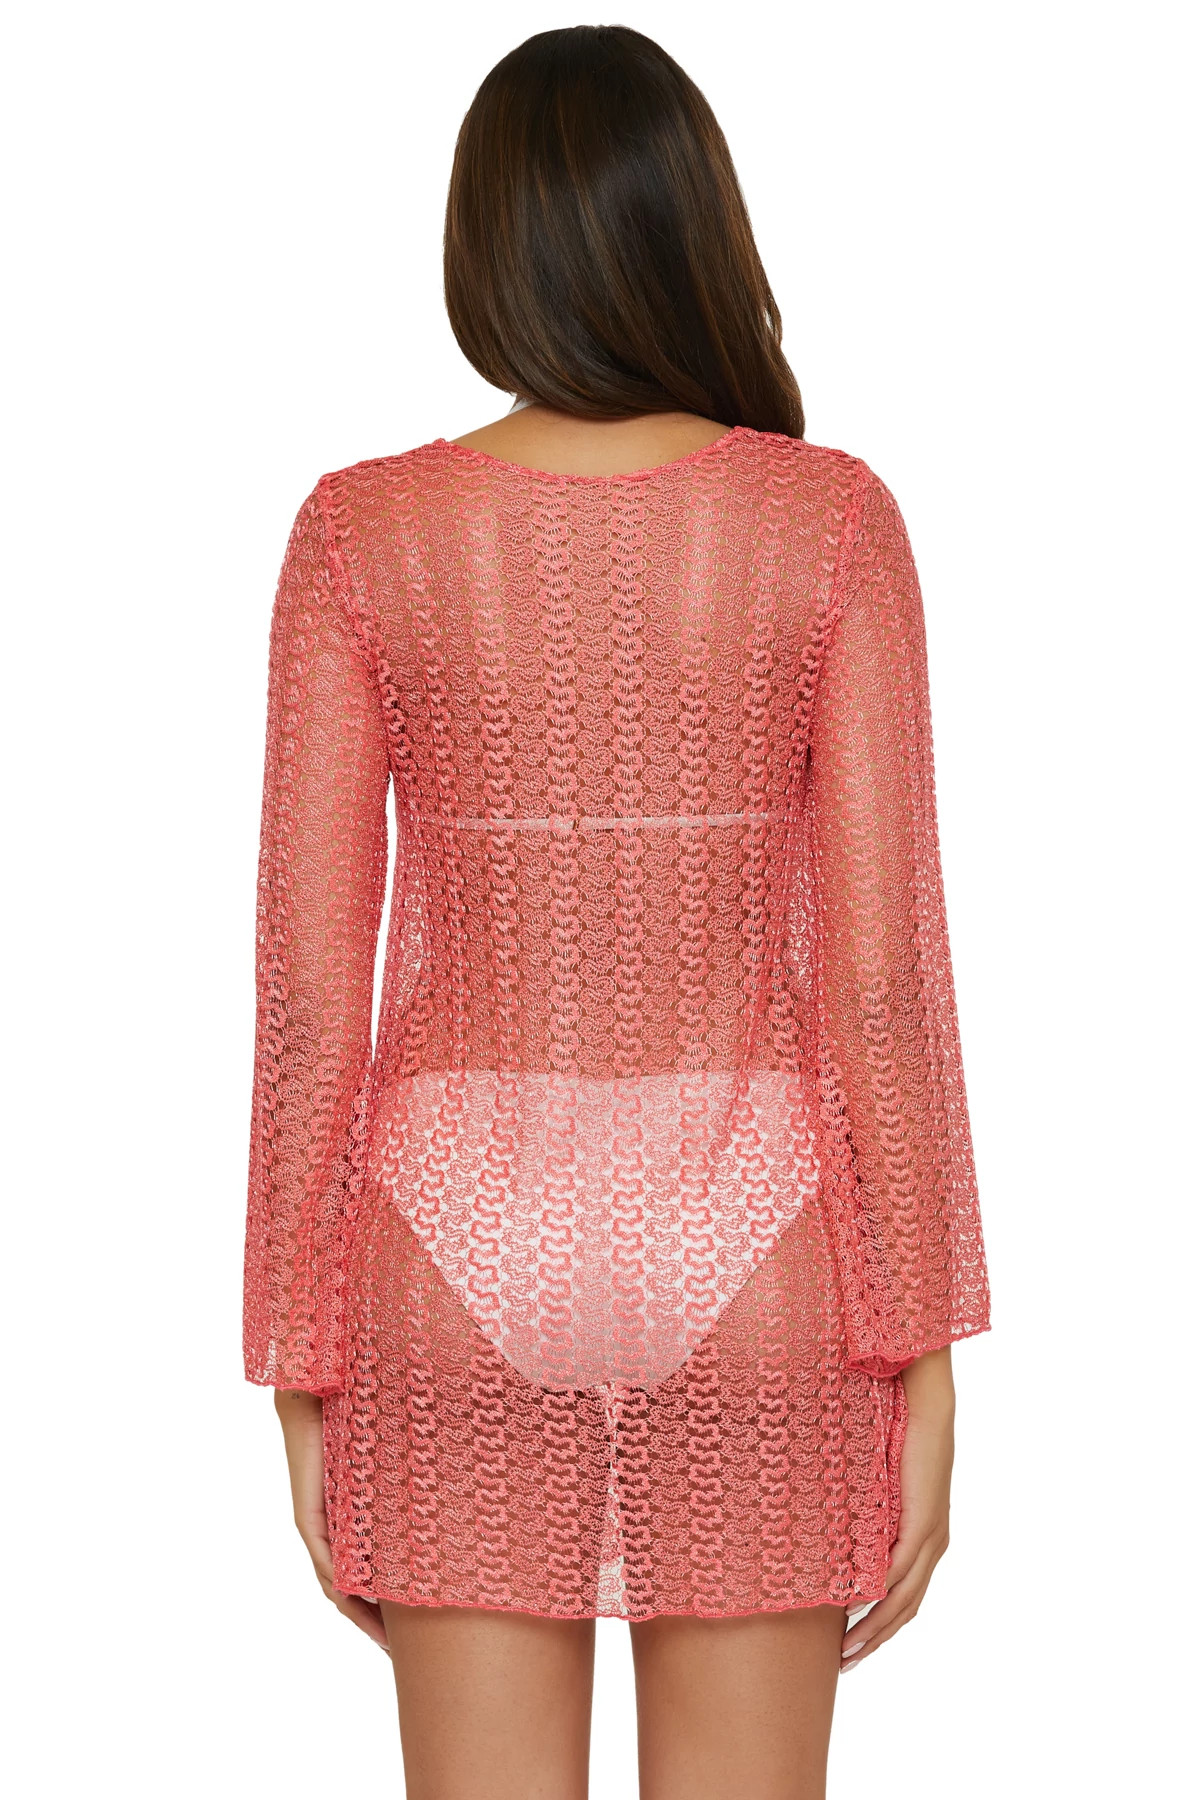 CORAL REEF Crochet Tunic image number 2